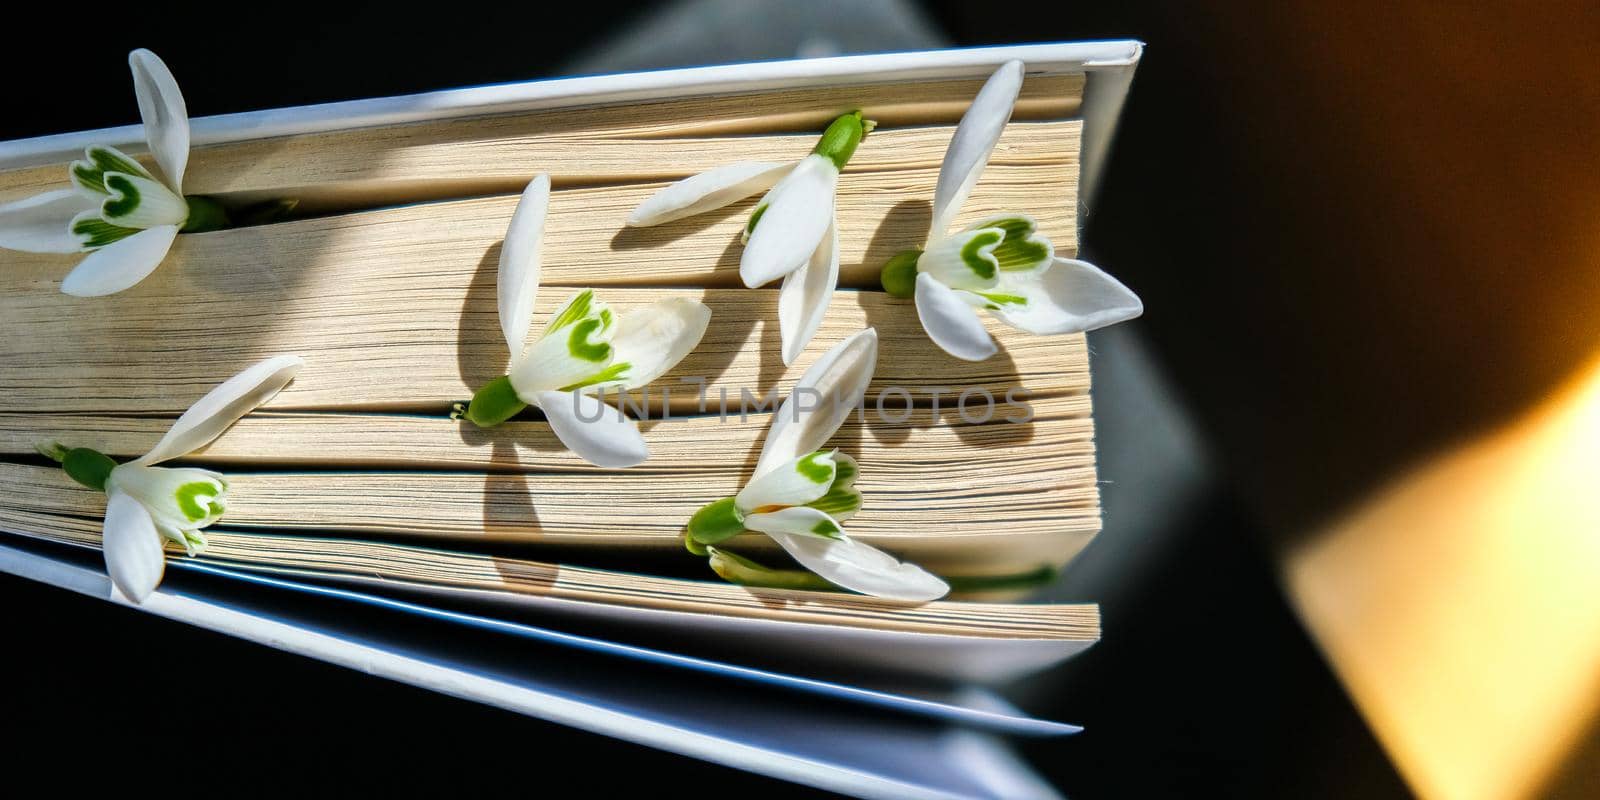 Snowdrop flowers on an old book. Early First spring flowers. Hello Spring. Still life with a book. Galanthus among pages of book. Concept of changing seasons, read fairy tales, plant care